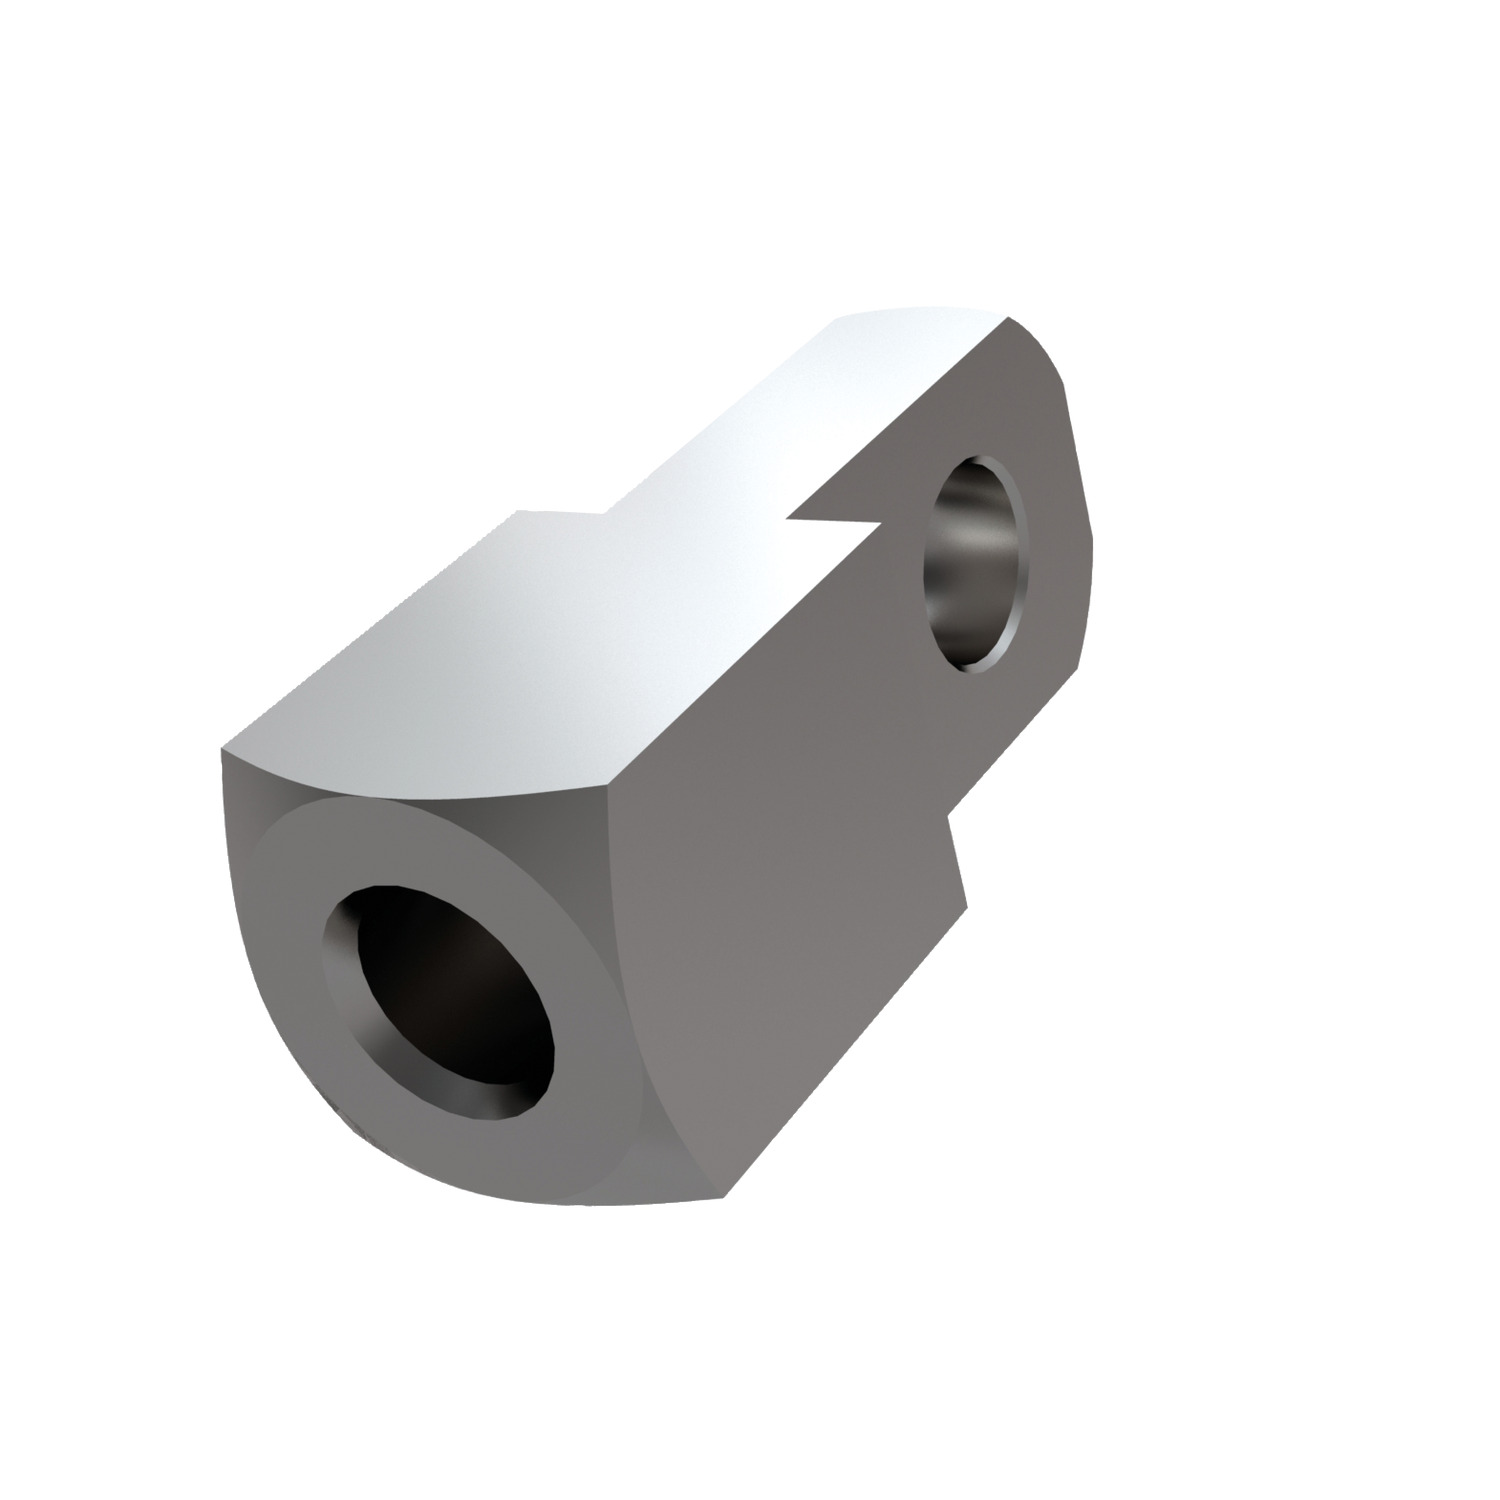 Product R3426, Stainless Mating Piece for Clevis Joints  / 